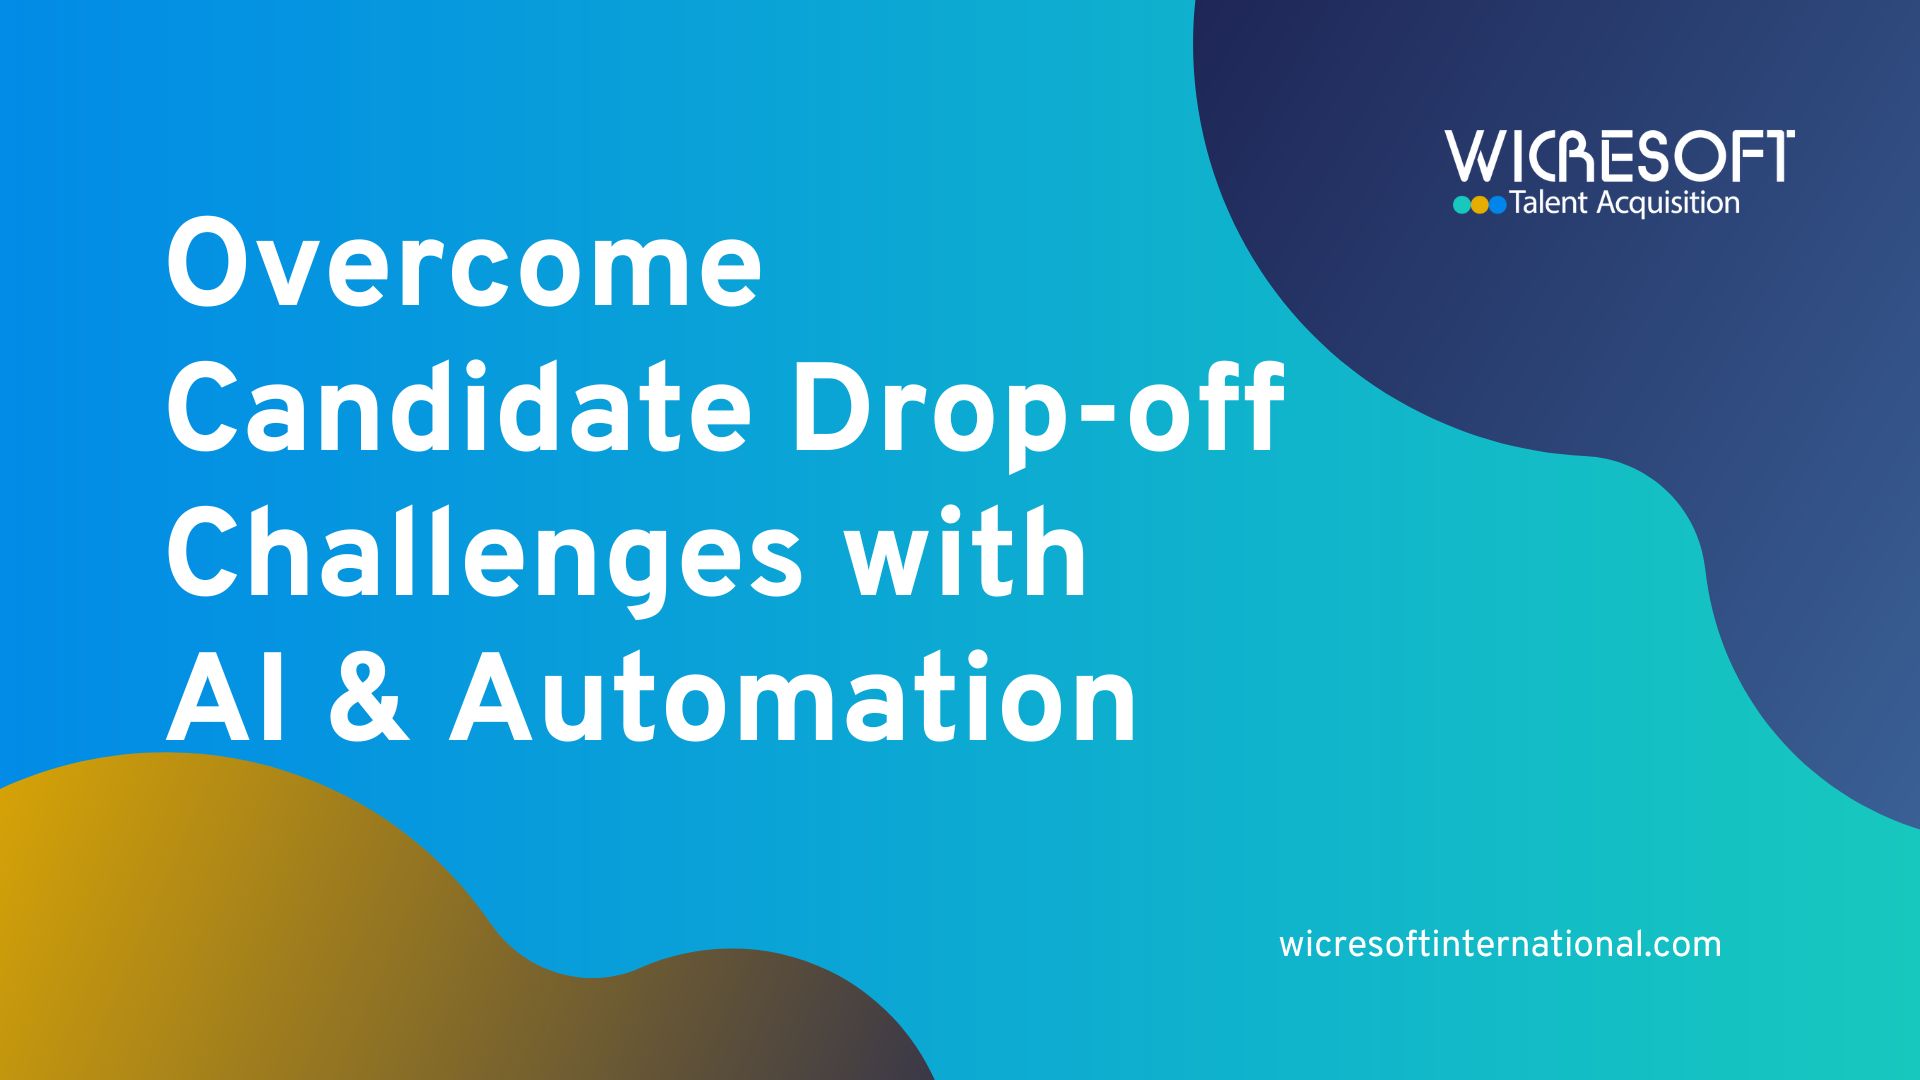  Overcome Candidate Drop-off Challenges with AI & Automation